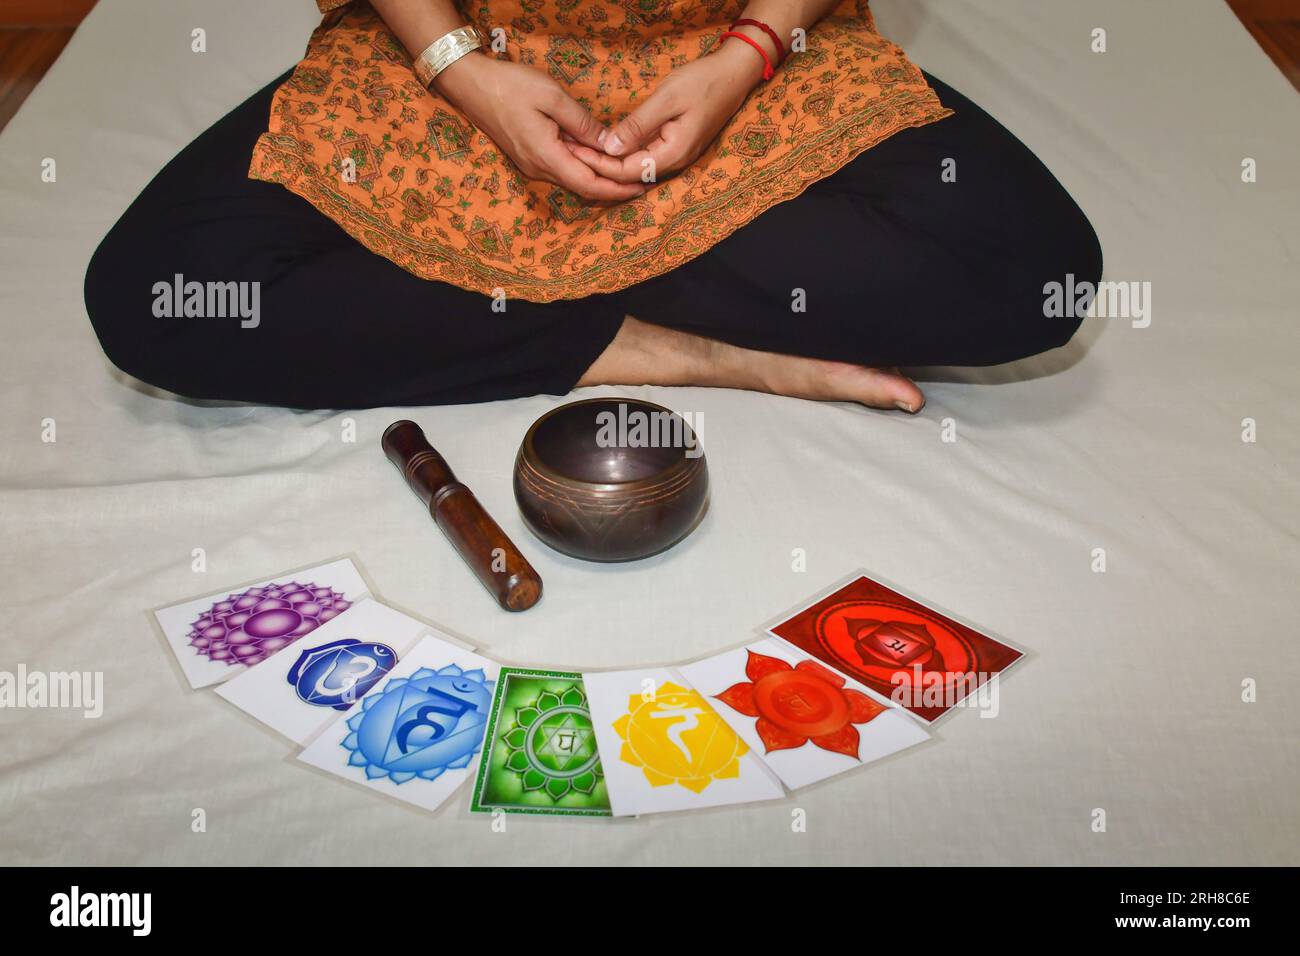 A woman practicing meditation and healing with a Tibetan singing bowl. Human body 7 Chakras energy system pictures, yoga meditation. Stock Photo